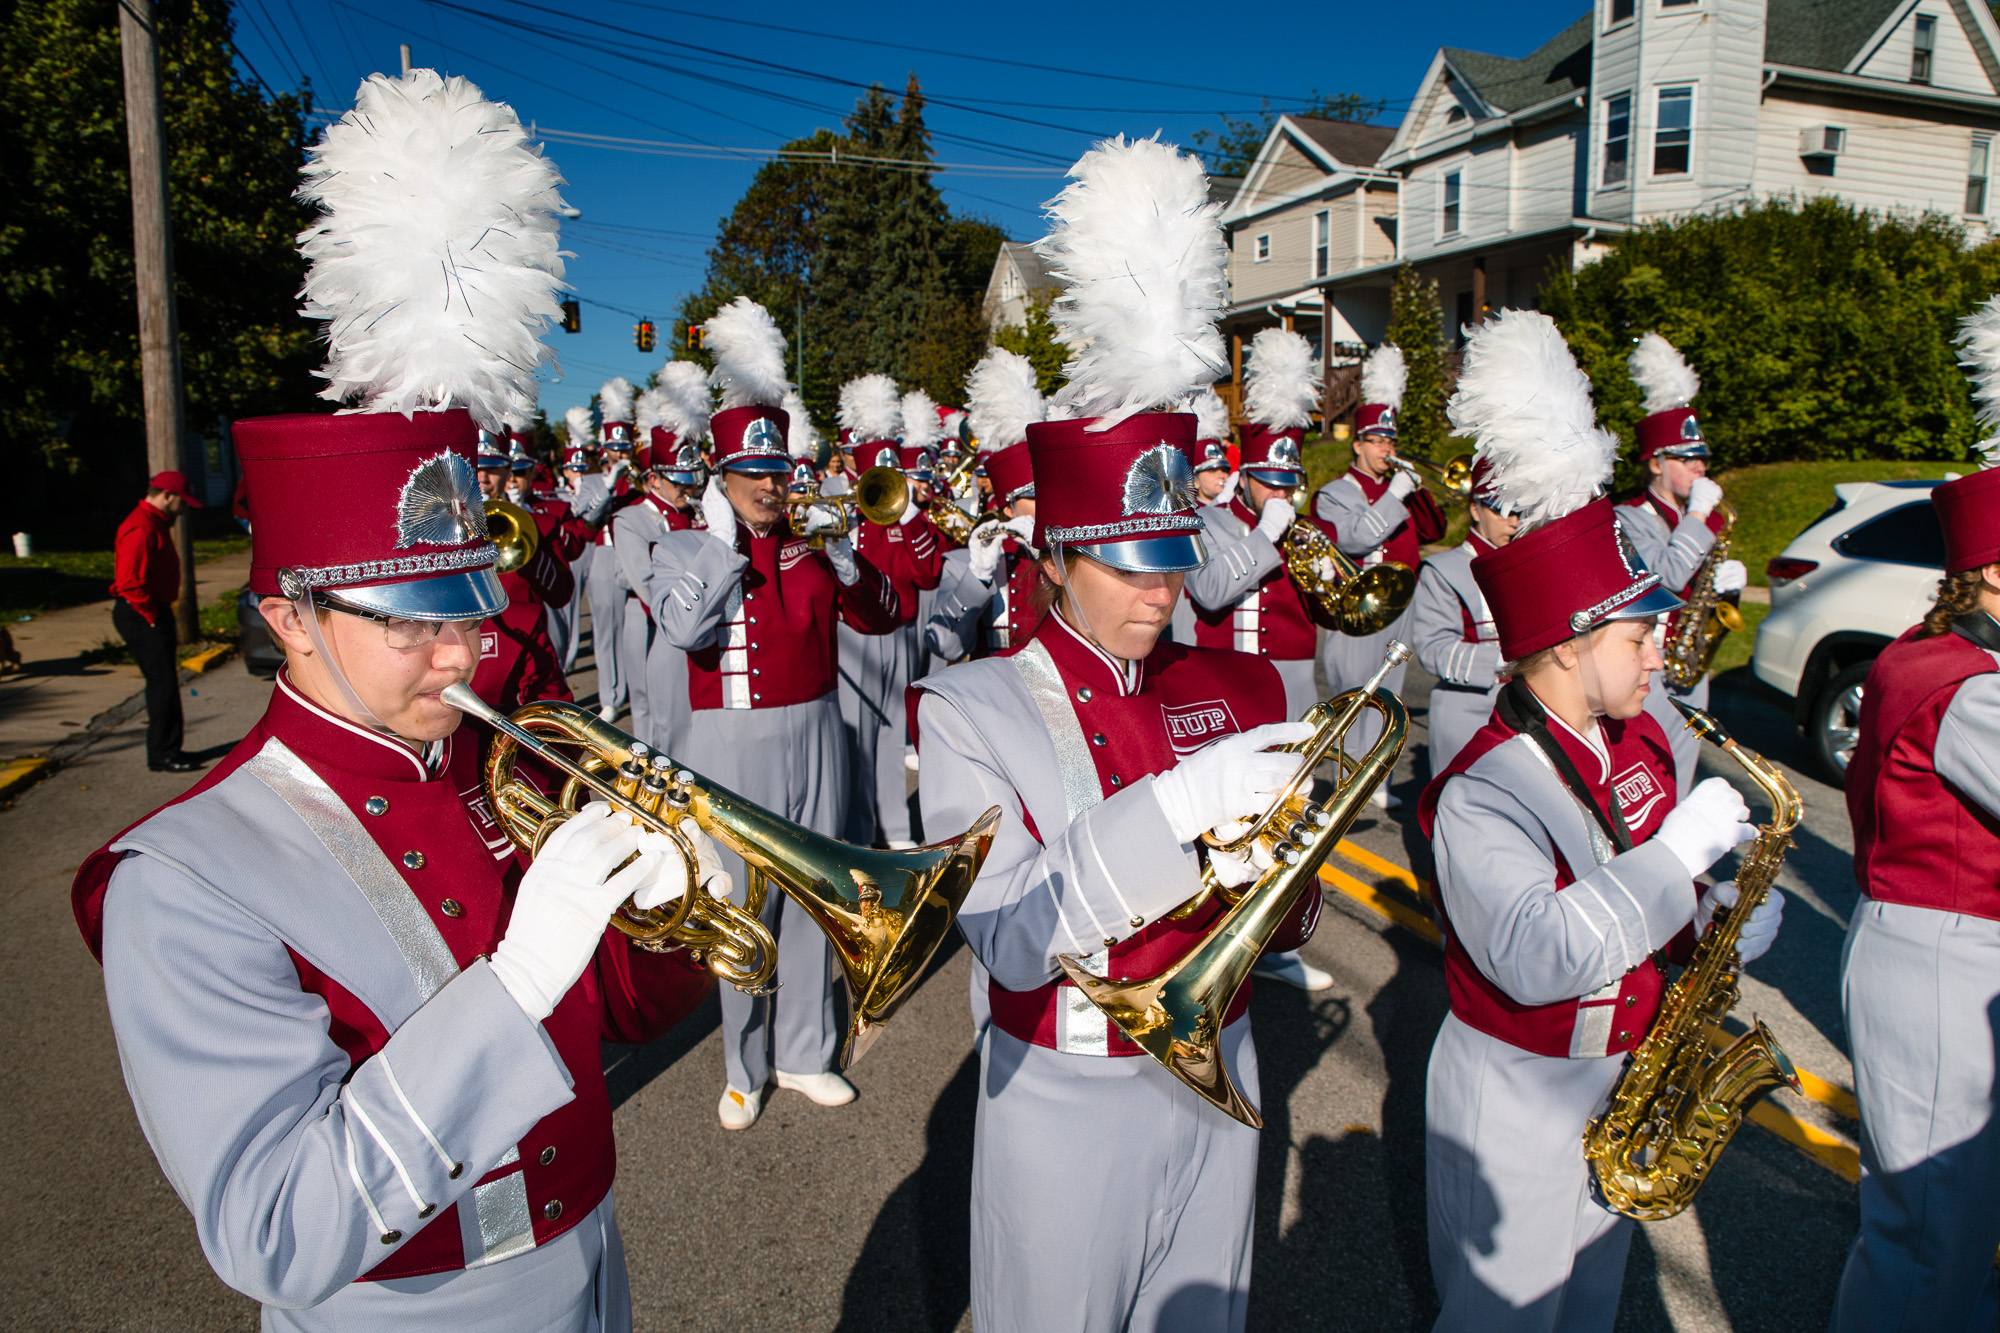 The IUP marching band warms up before the start of the 2019 homecoming parade.